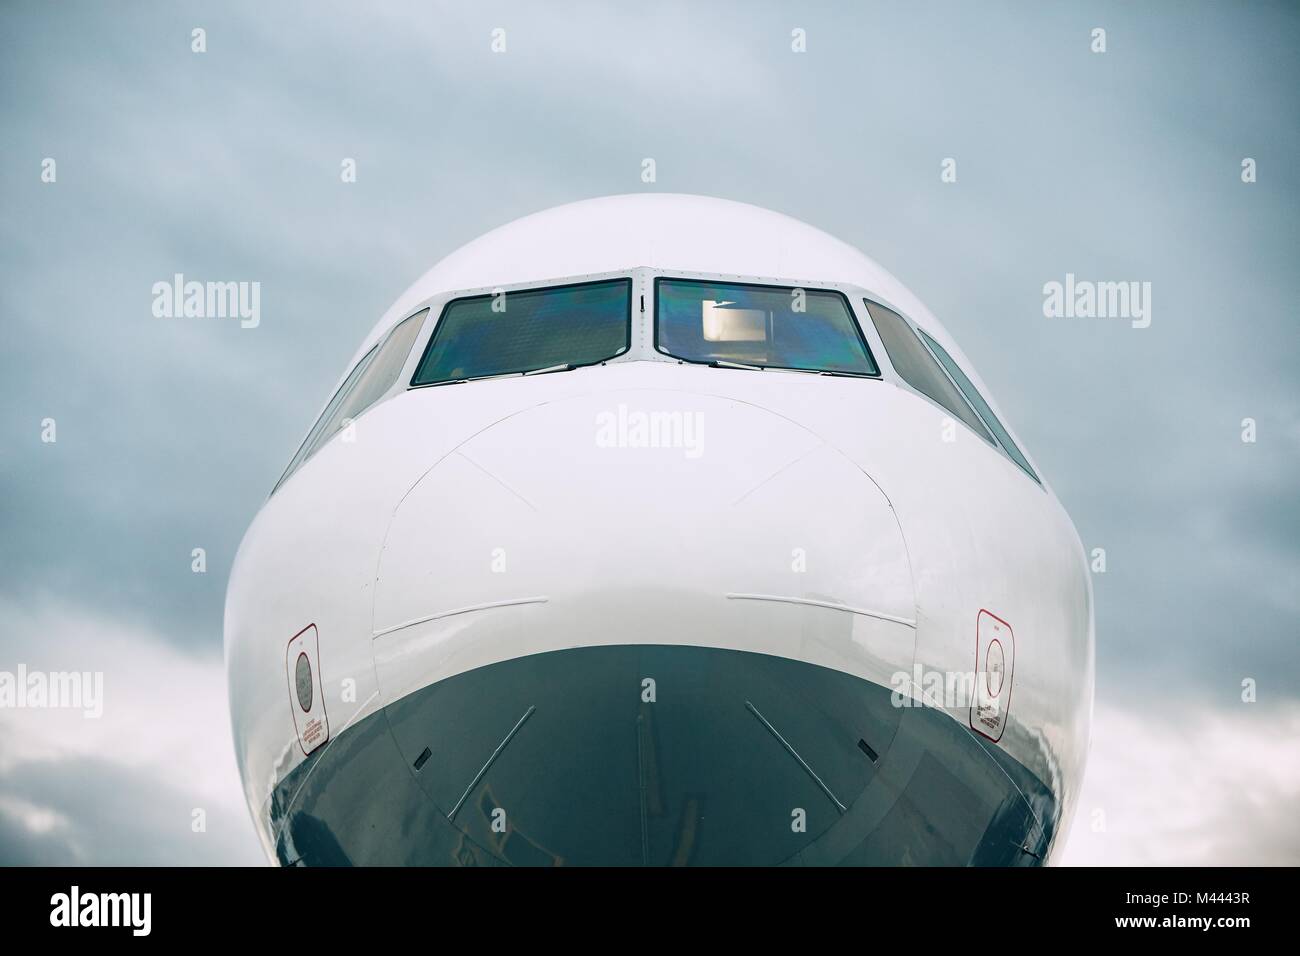 Front view of the airplane nose against cloud sky. Stock Photo